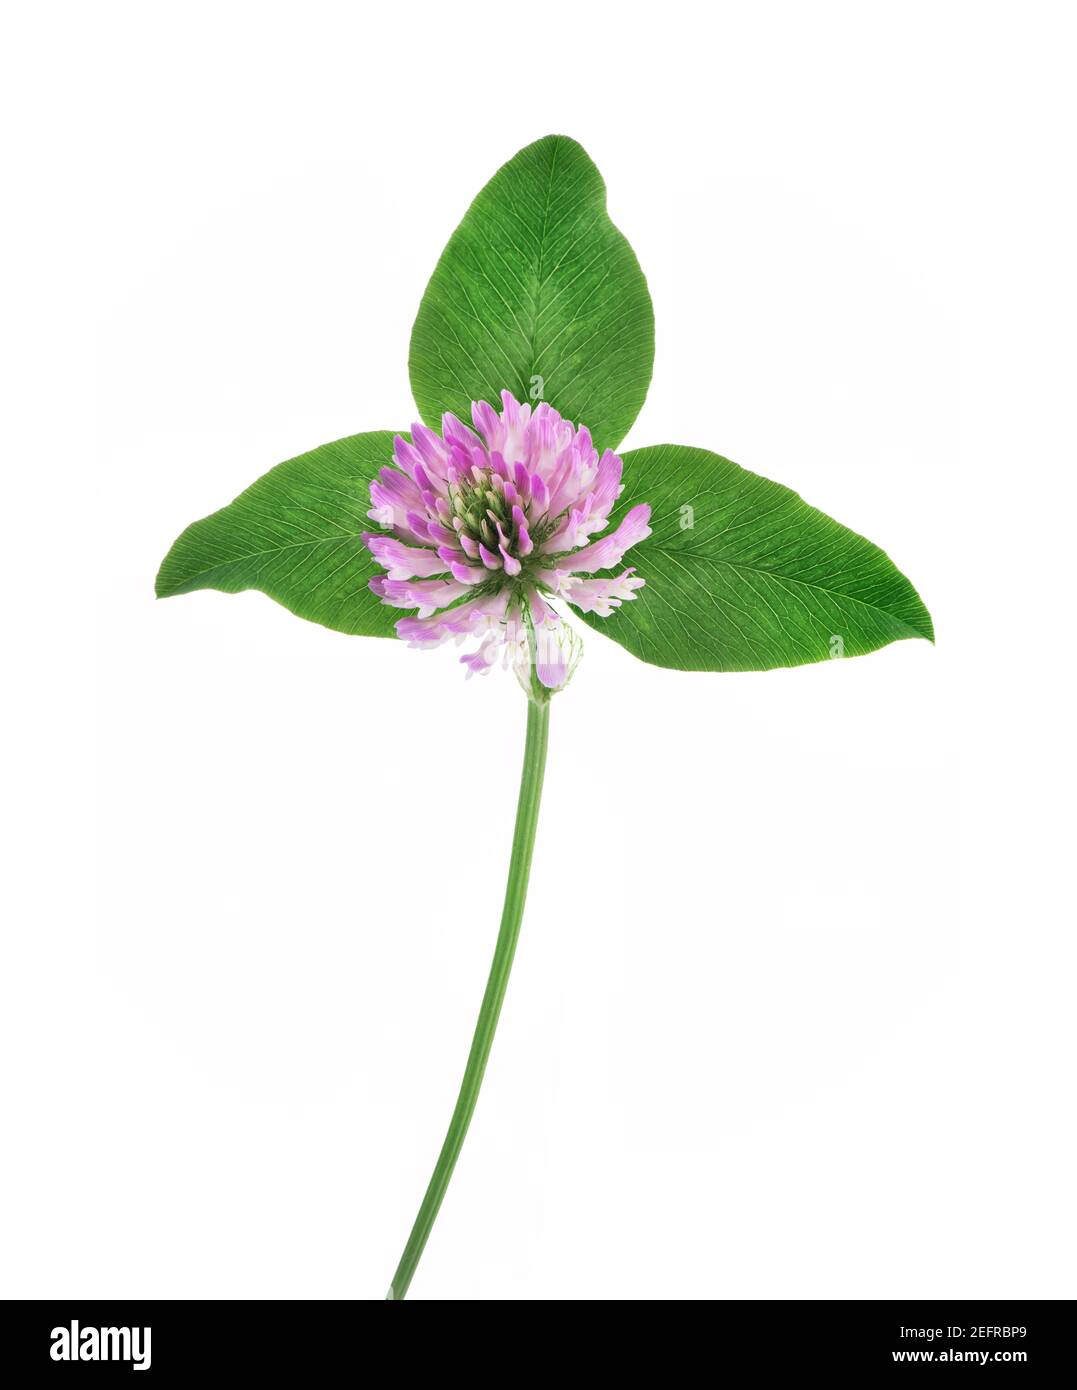 Red clover, Trifolium pratense. Artistic closeup of a purple flower with three green leaves. Herbaceous, blossoming plant. Medicinal herb, front view Stock Photo